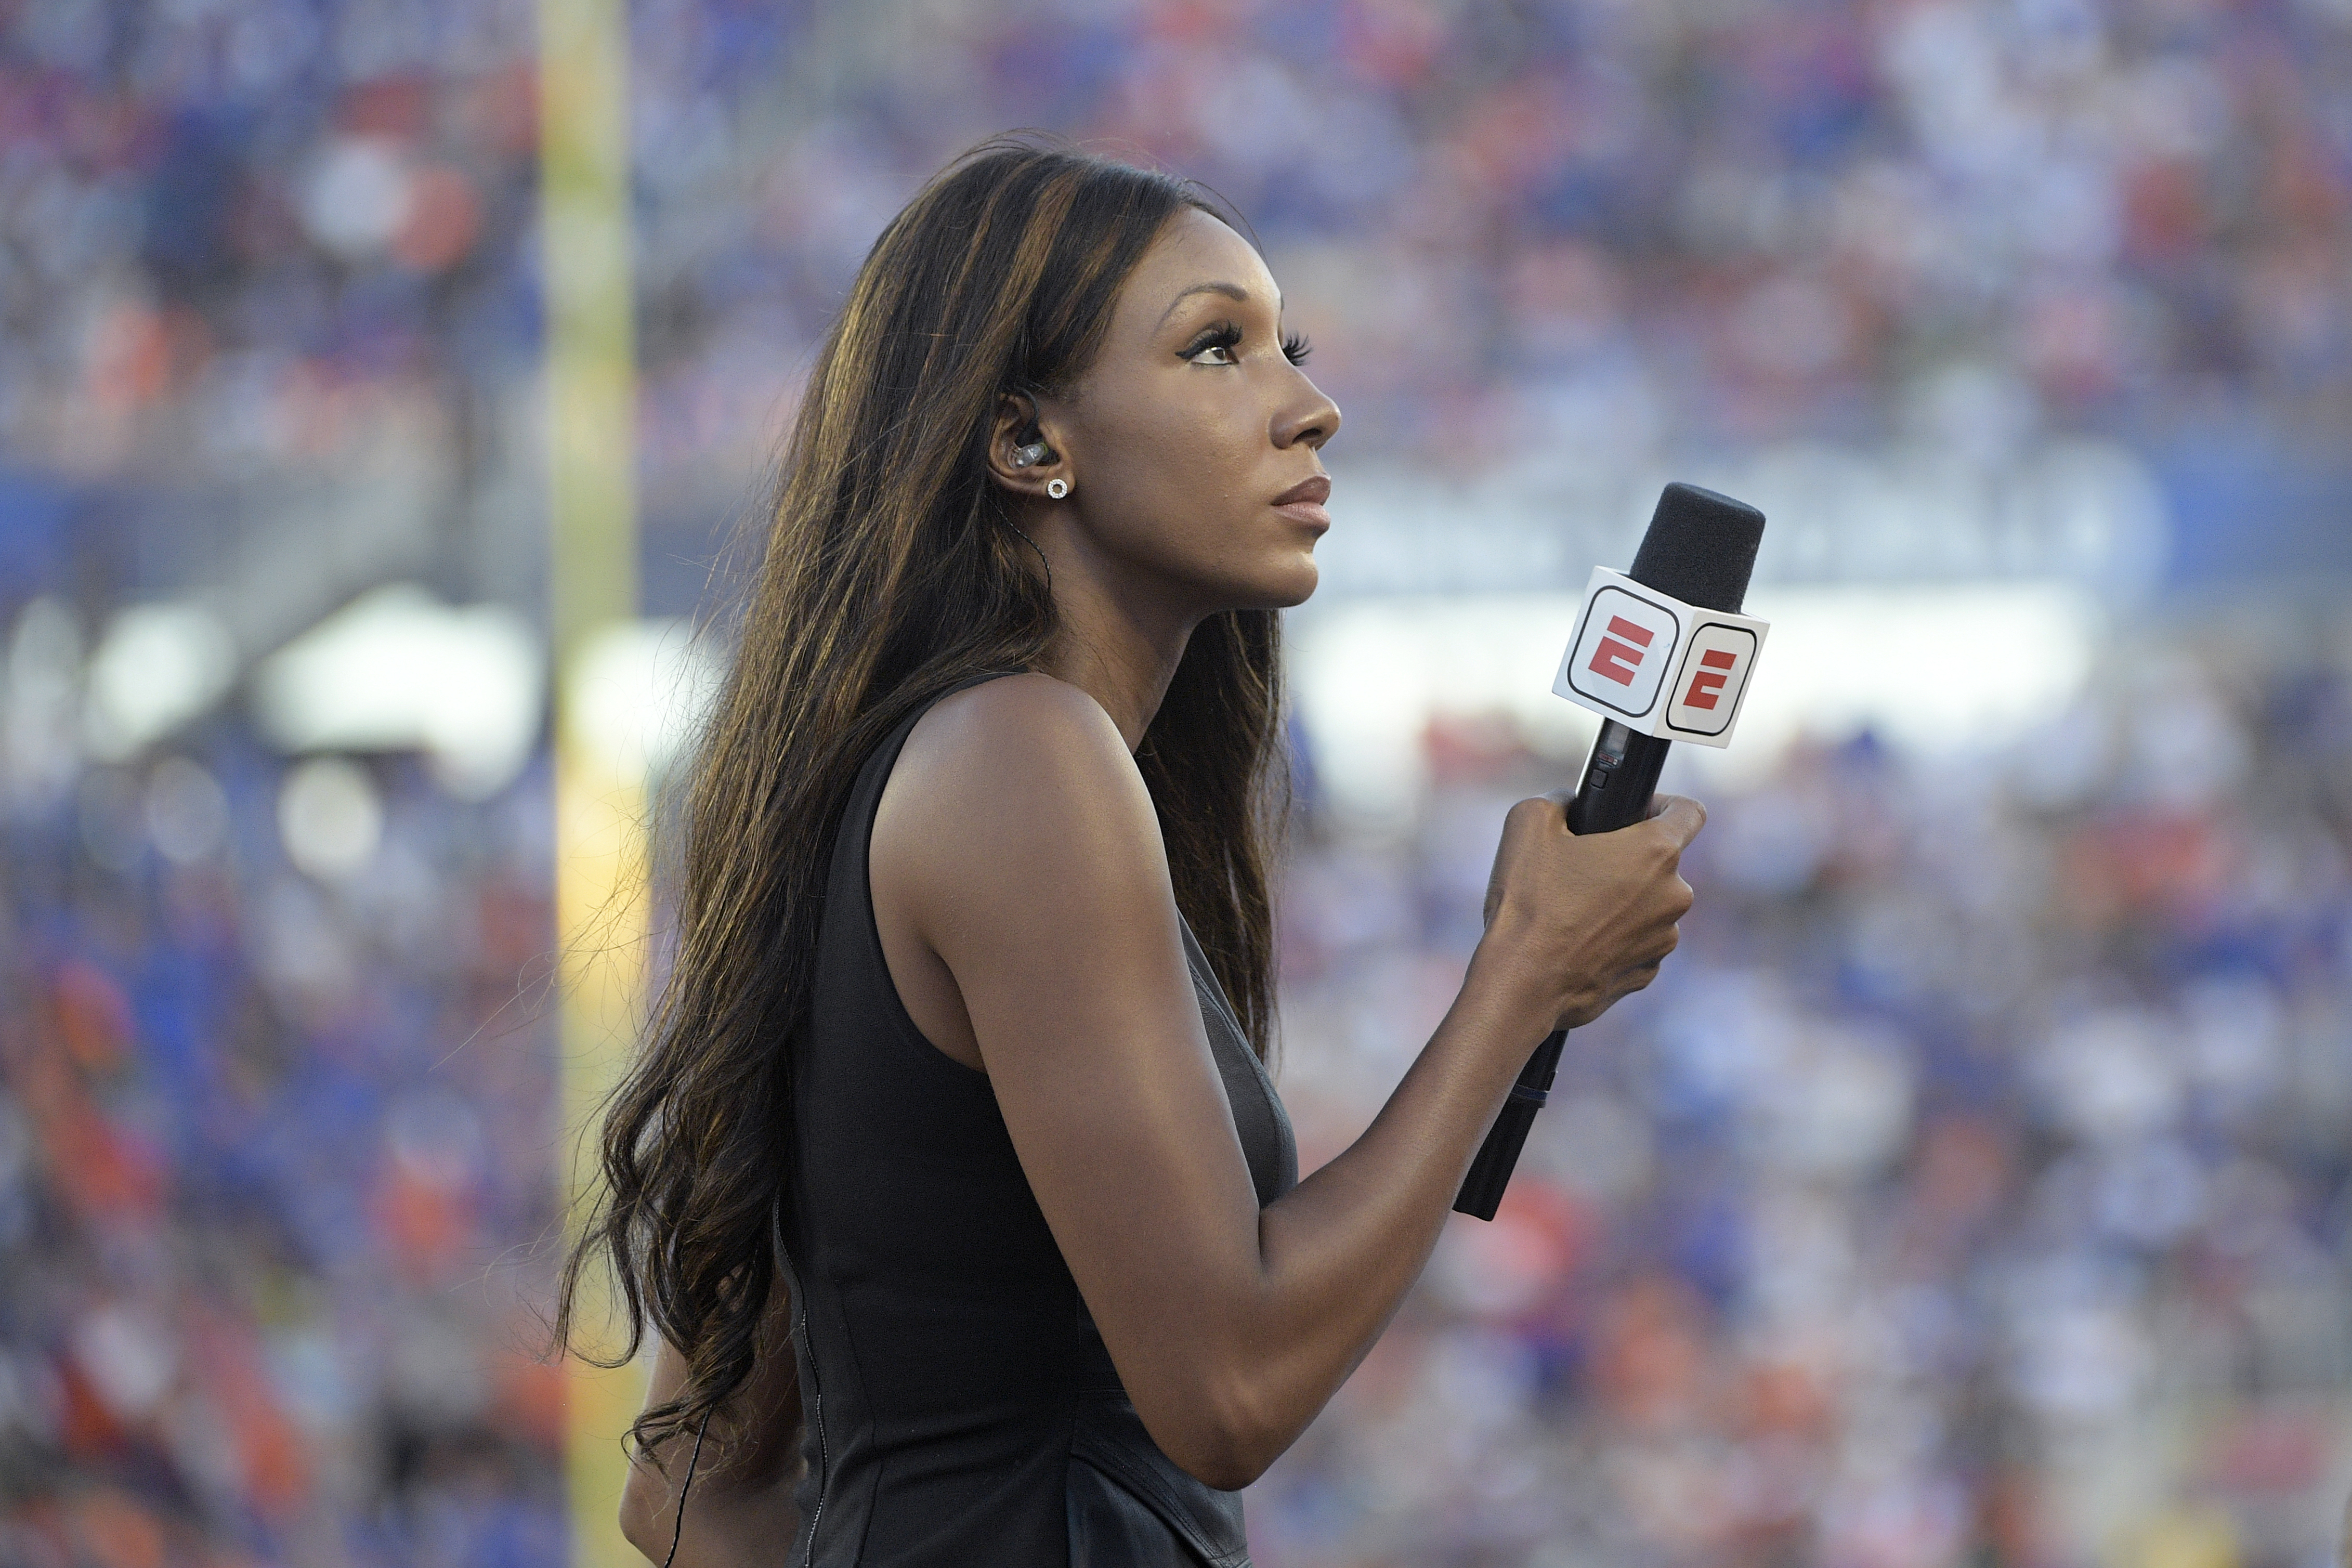 NBC Sports 'Sunday Night Football' host Maria Taylor in images